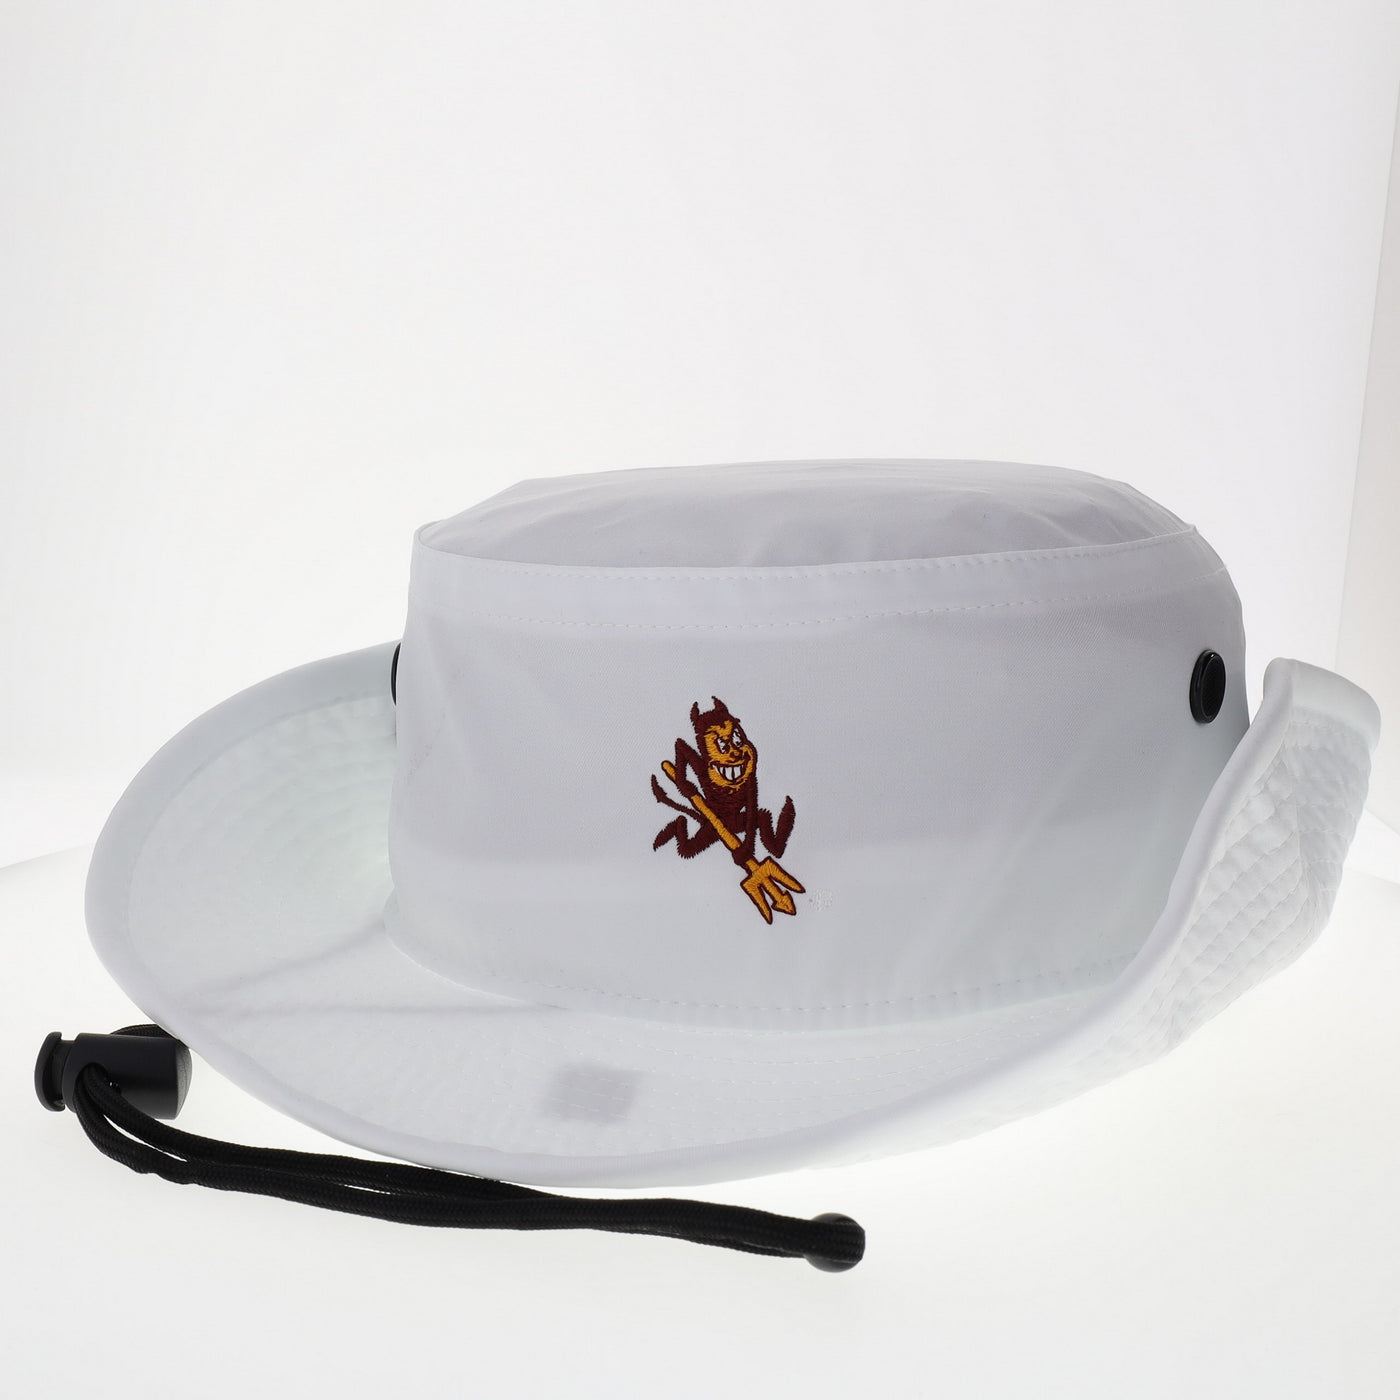 ASU white bucket hat with 2 black snap buttons, adjustable chin strap, and a embroidered Sparky on the front